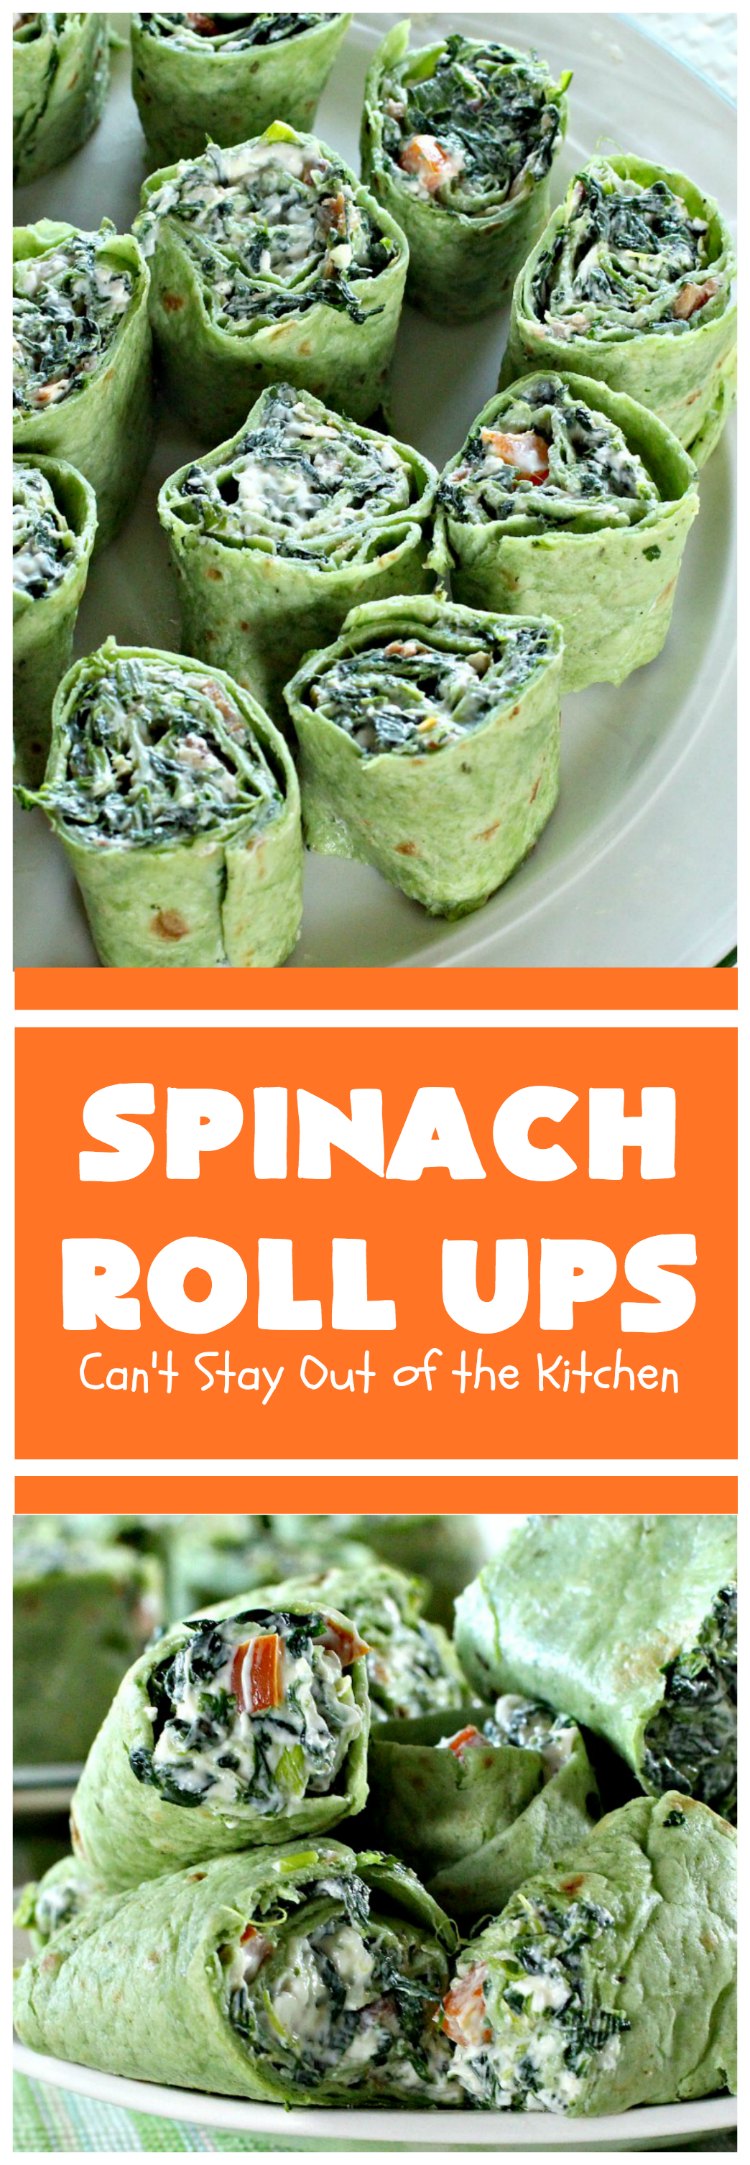 Spinach Roll Ups | Can't Stay Out of the Kitchen